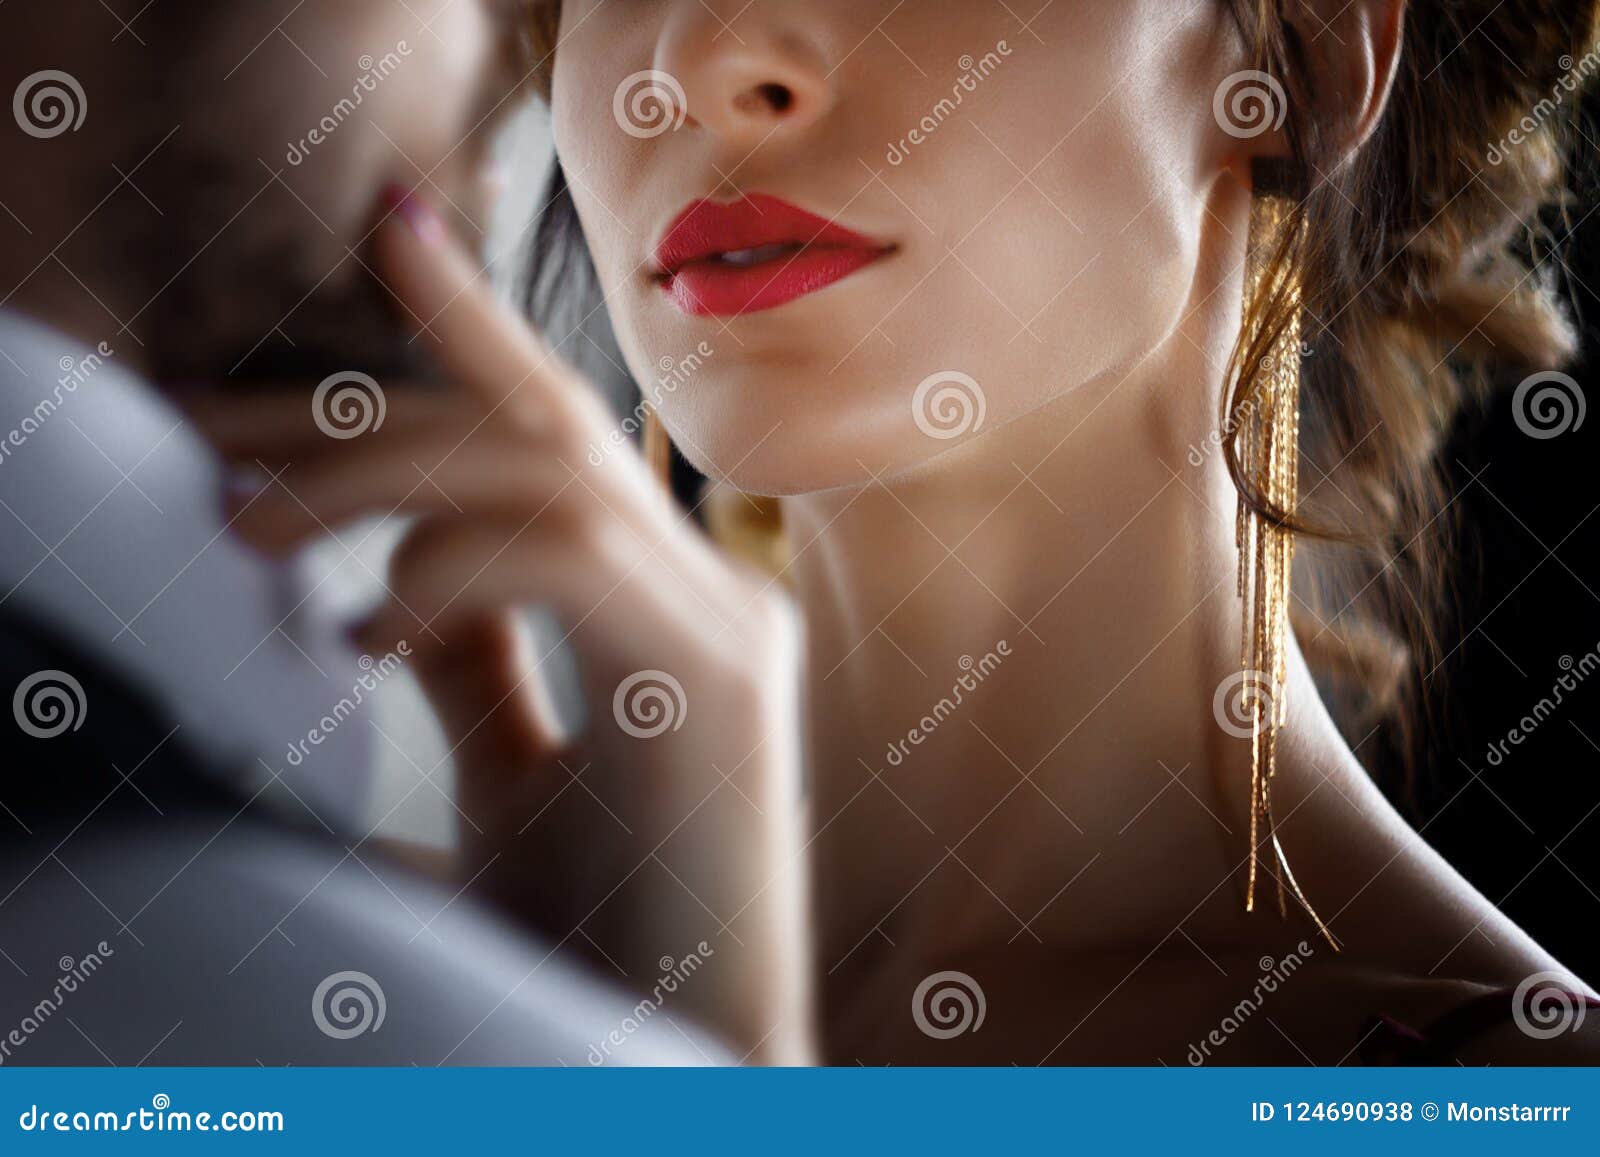 Rich Man Tempts Woman in Red Evening Dress Stock Photo picture image pic